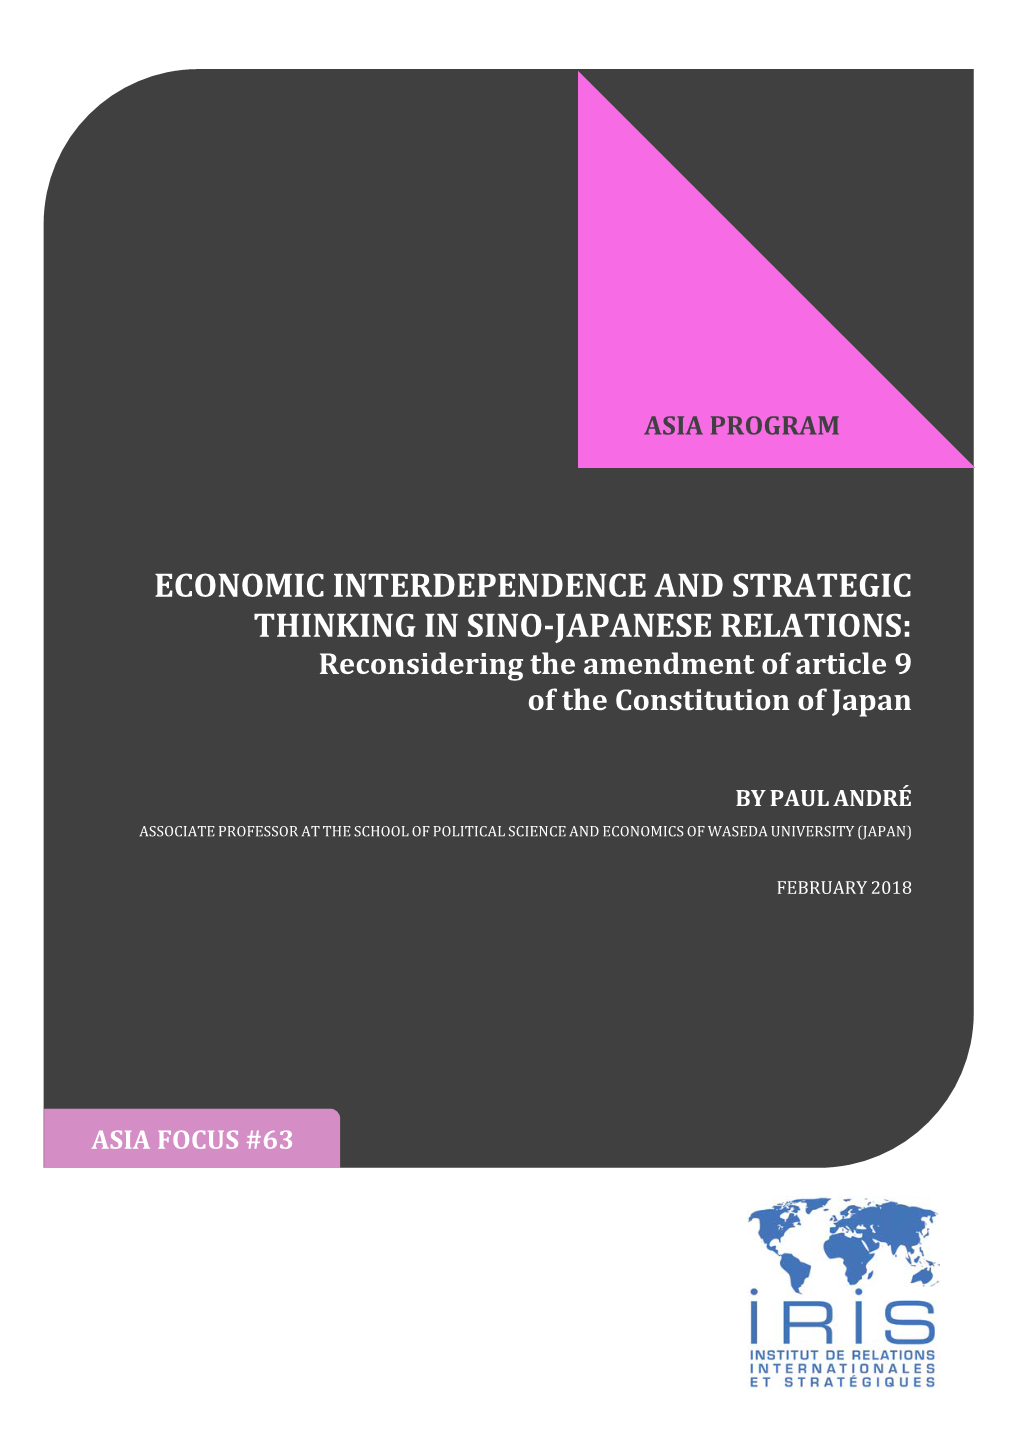 ECONOMIC INTERDEPENDENCE and STRATEGIC THINKING in SINO-JAPANESE RELATIONS: Reconsidering the Amendment of Article 9 of the Constitution of Japan